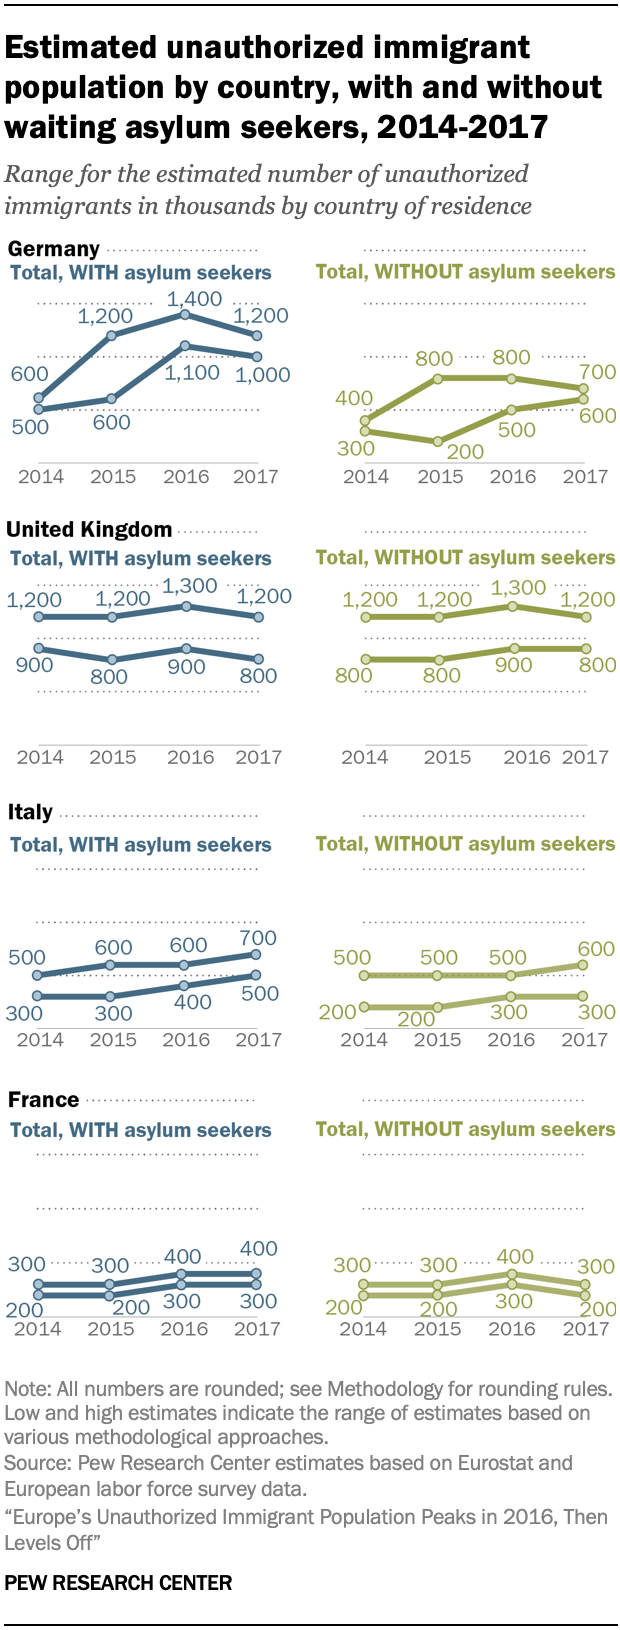 Estimated unauthorized immigrant population by country, with and without waiting asylum seekers, 2014-2017